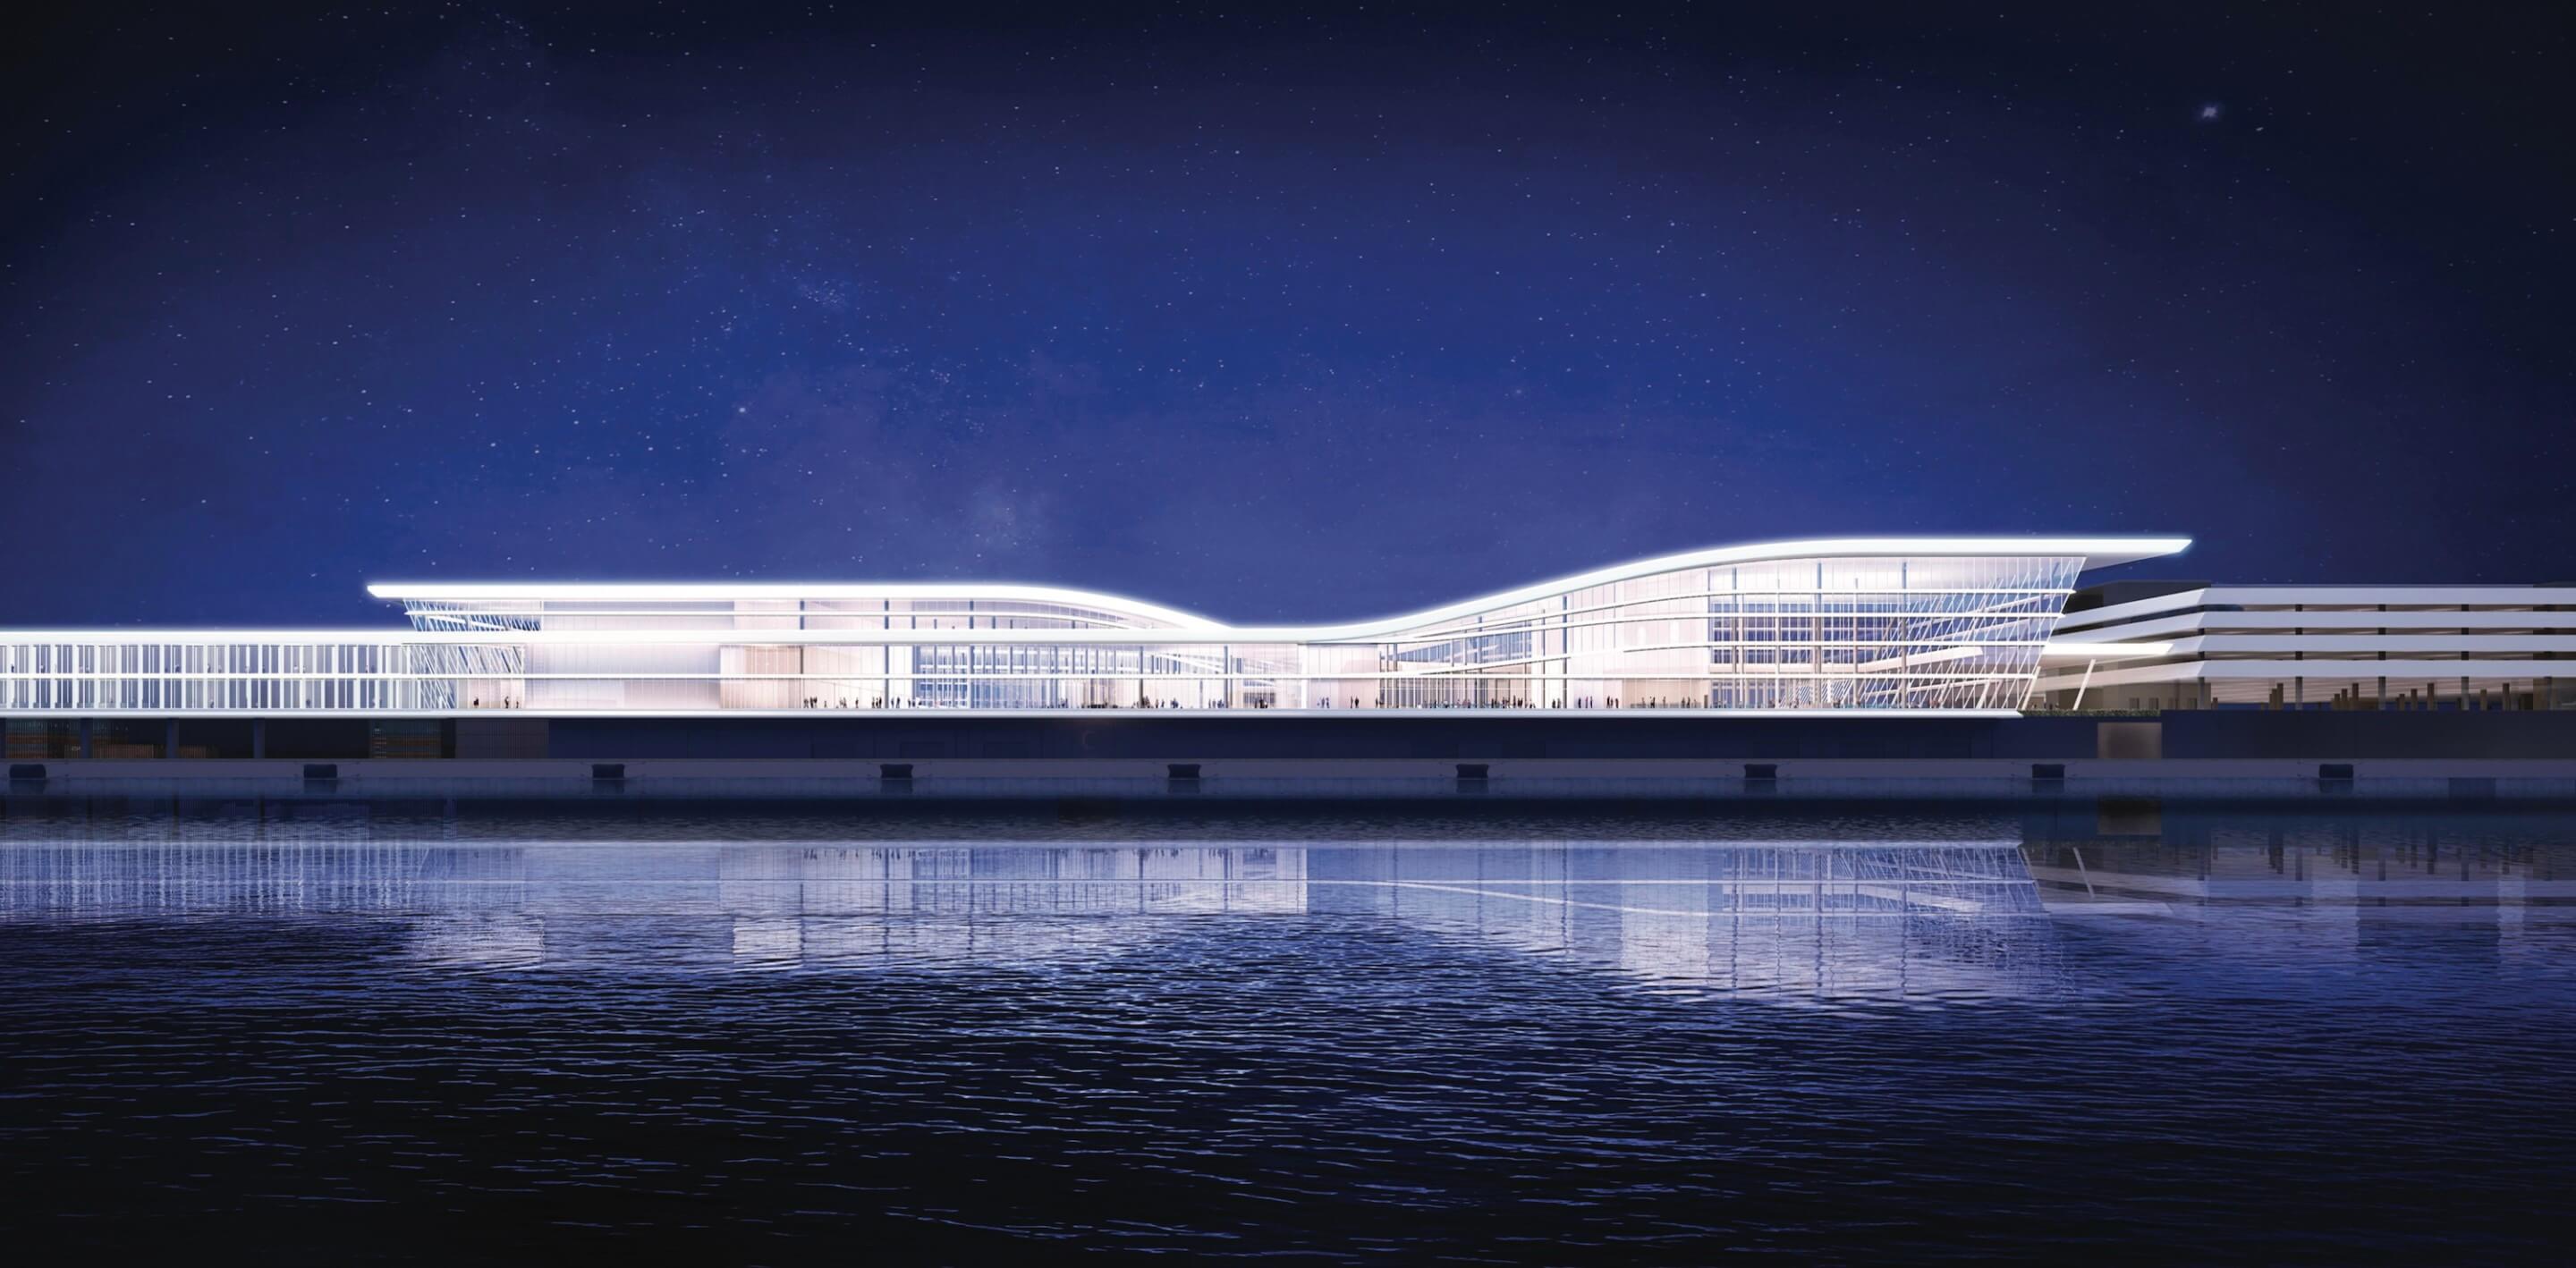 exterior rendering of a cruise ship terminal at night